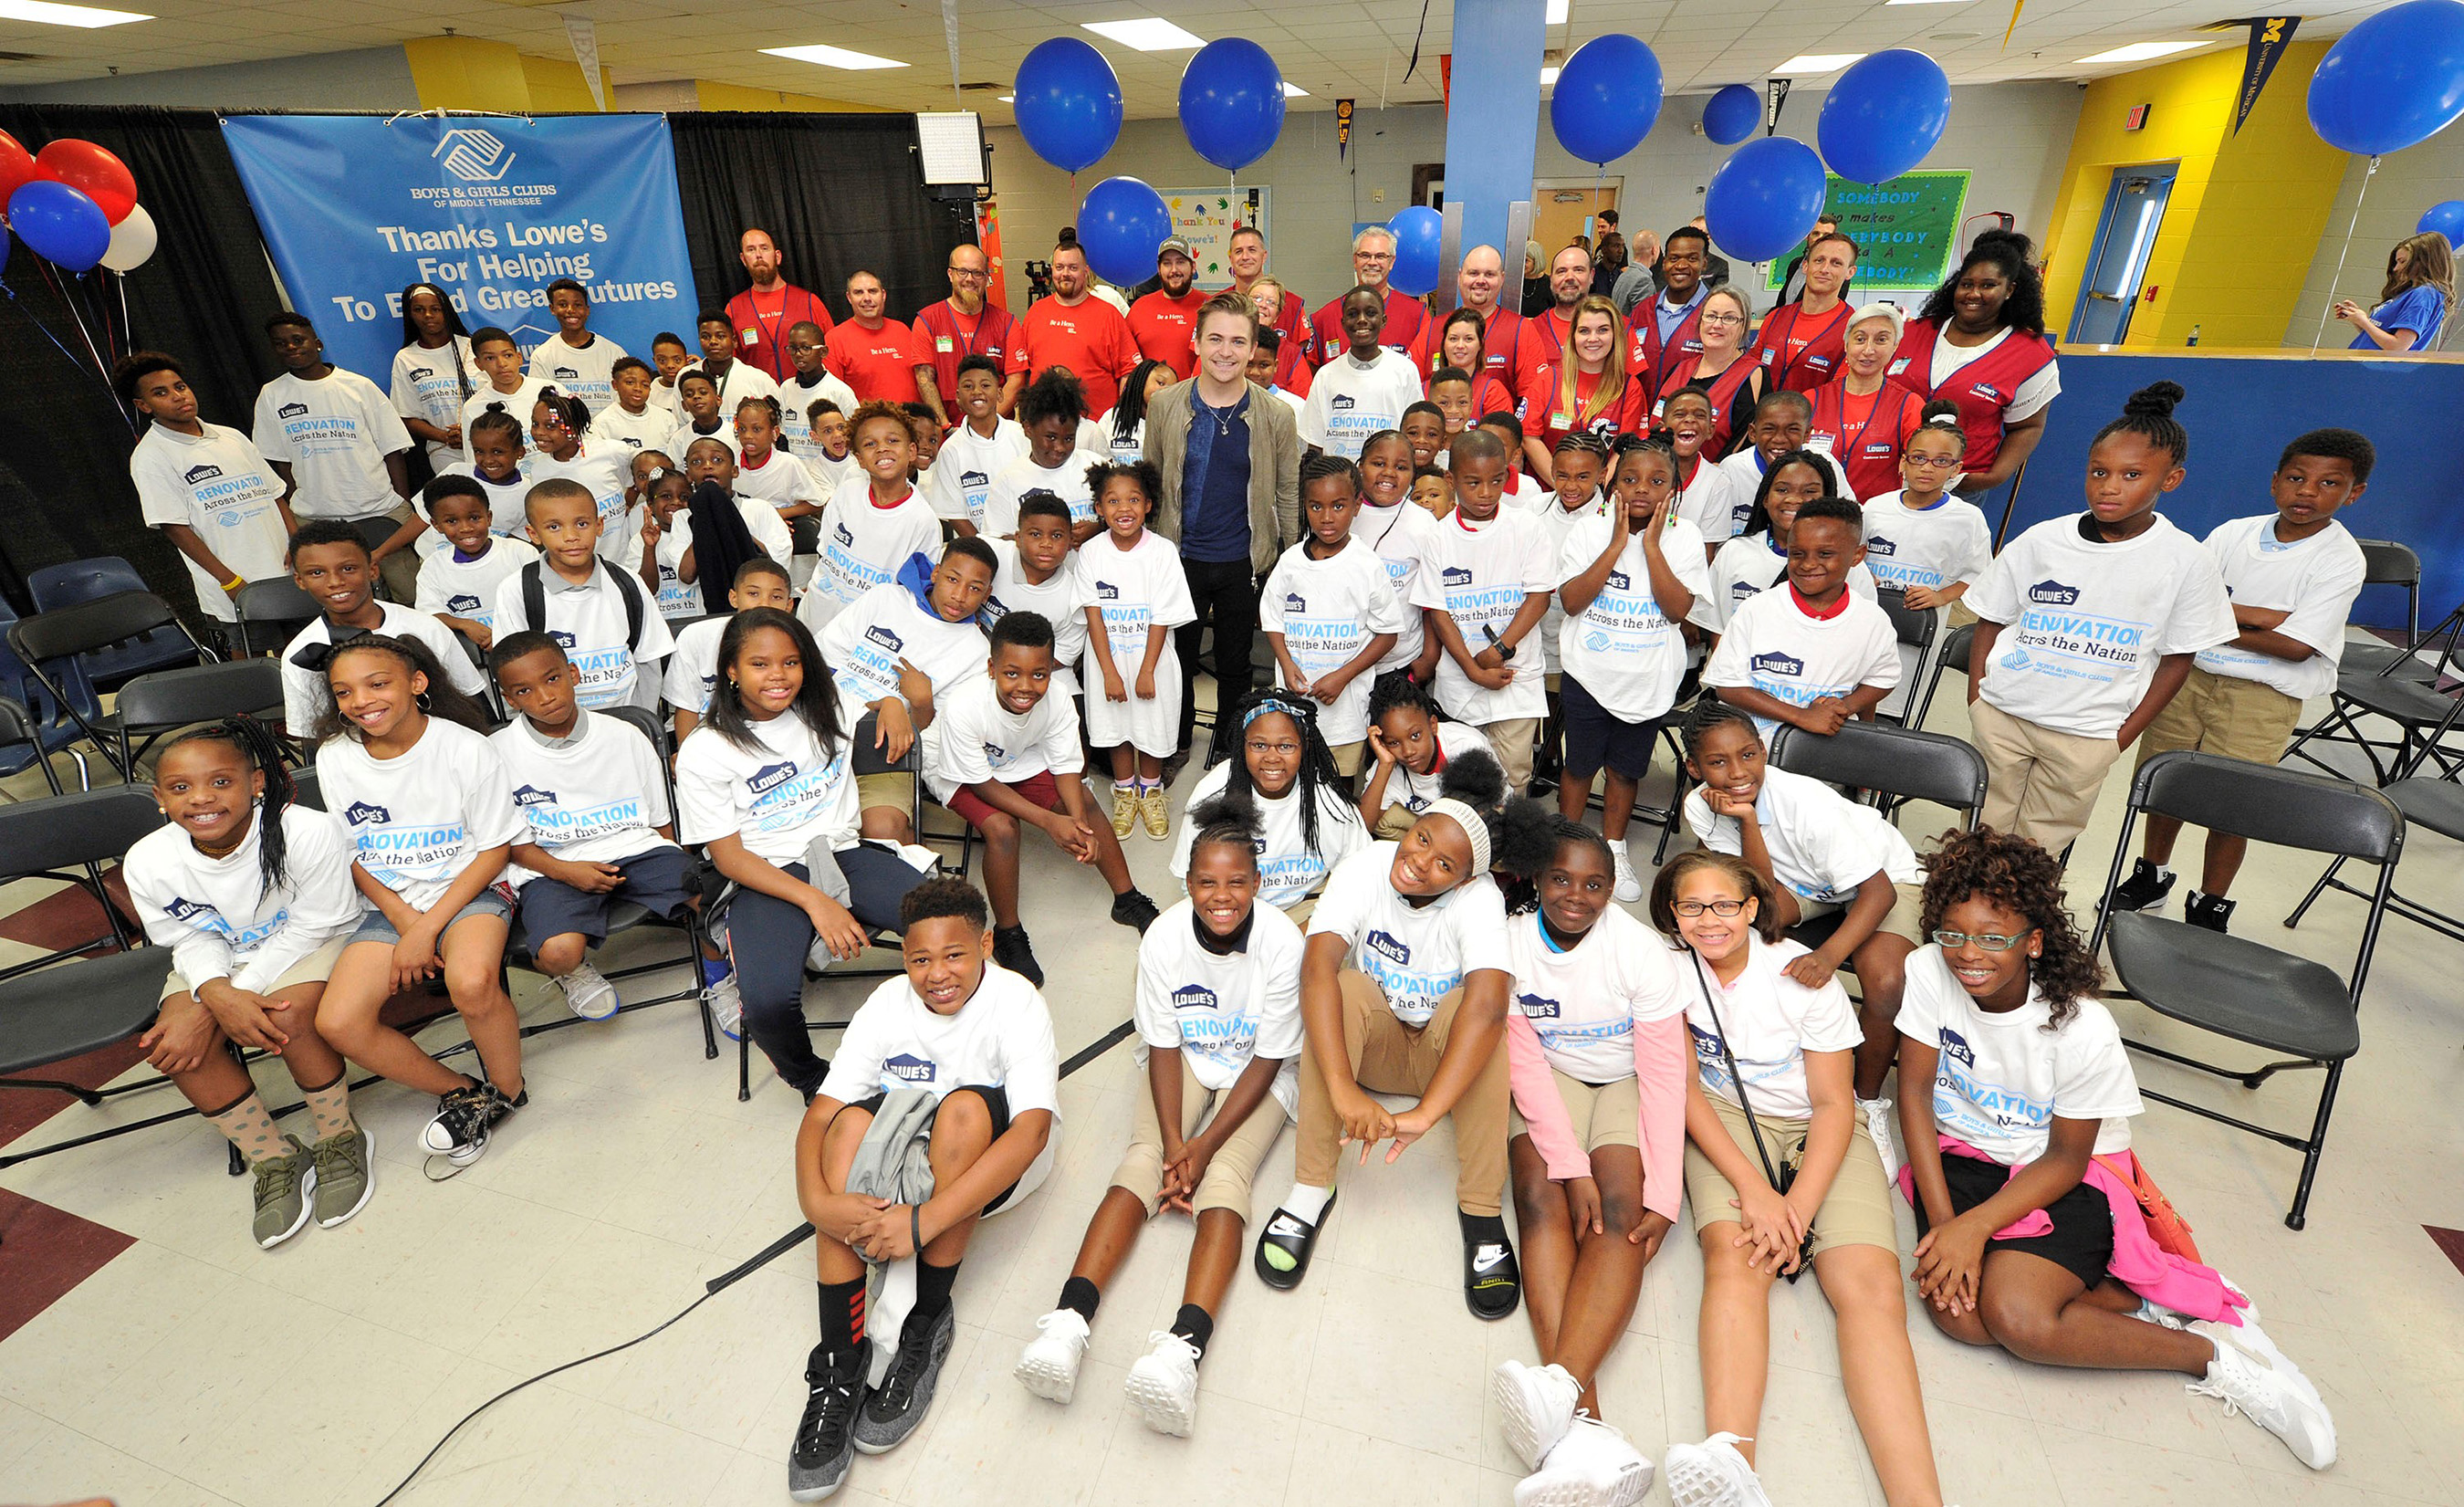 Country music artist Hunter Hayes surprises youth at Preston Taylor Boys & Girls Club for the Lowe's Renovation Across the Nation event on Tuesday, August 8, 2017 in Nashville, Tennessee.